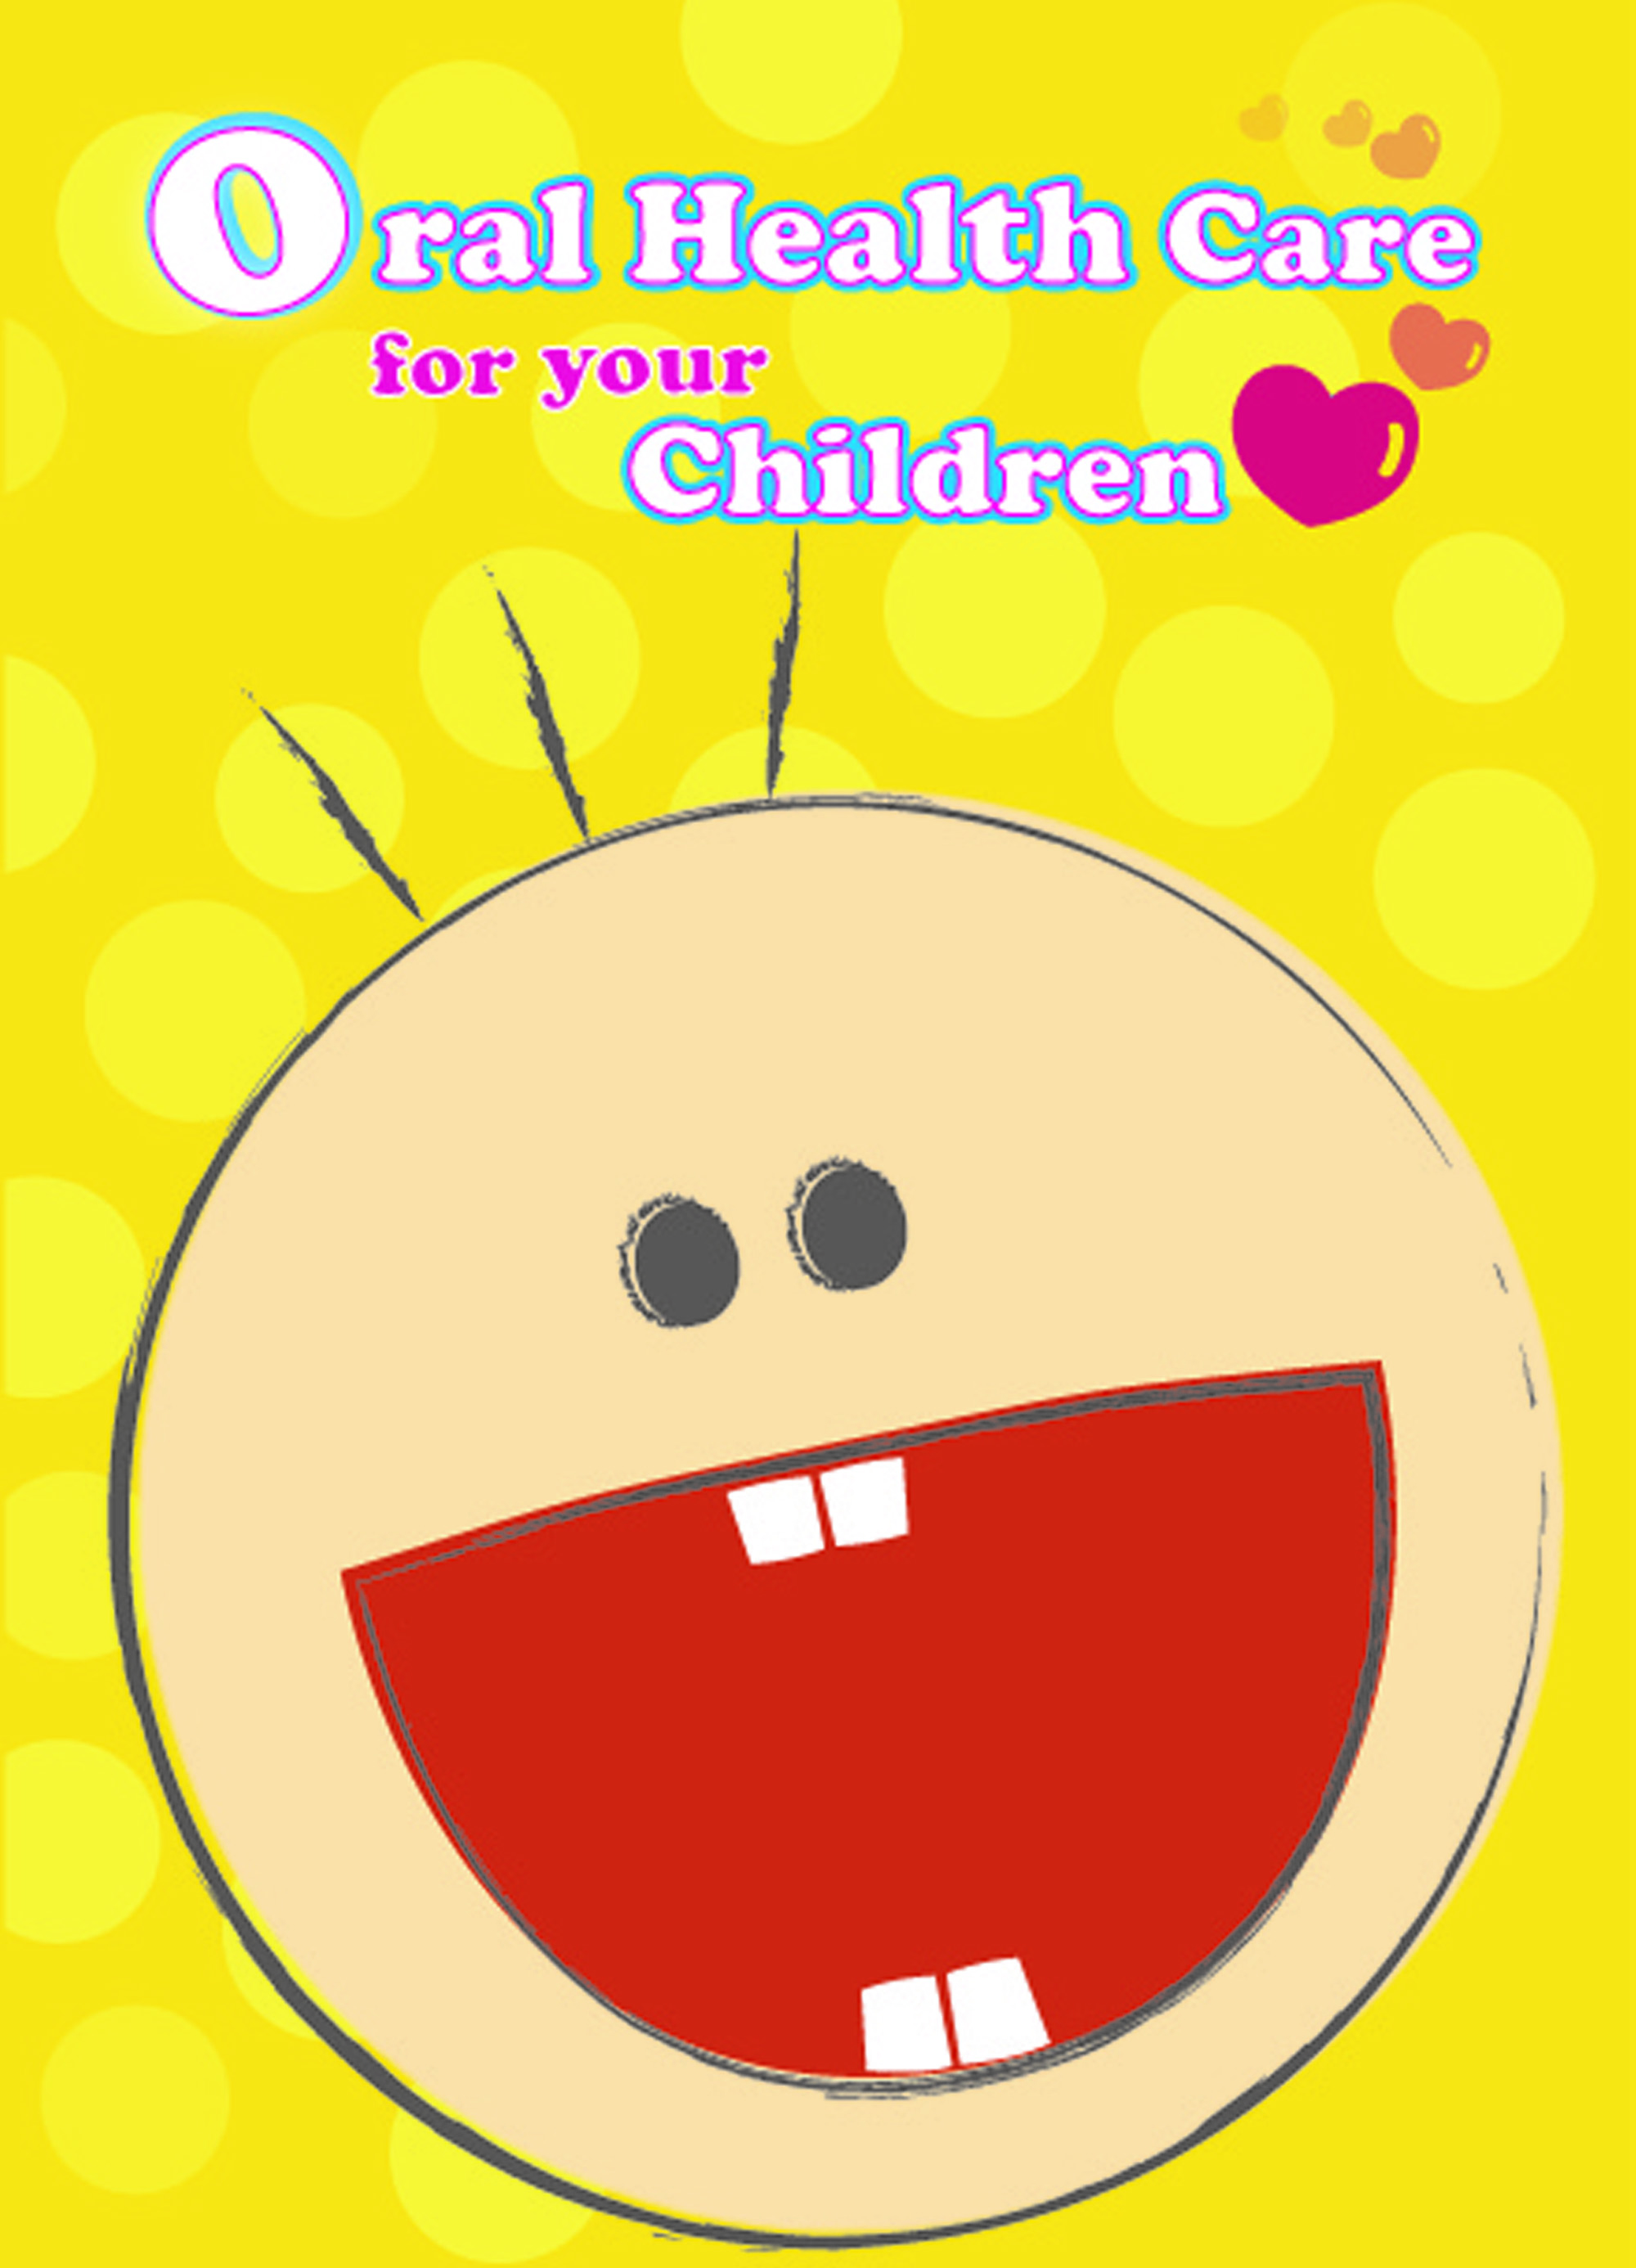 Oral Health Care for your Children (Cover page)